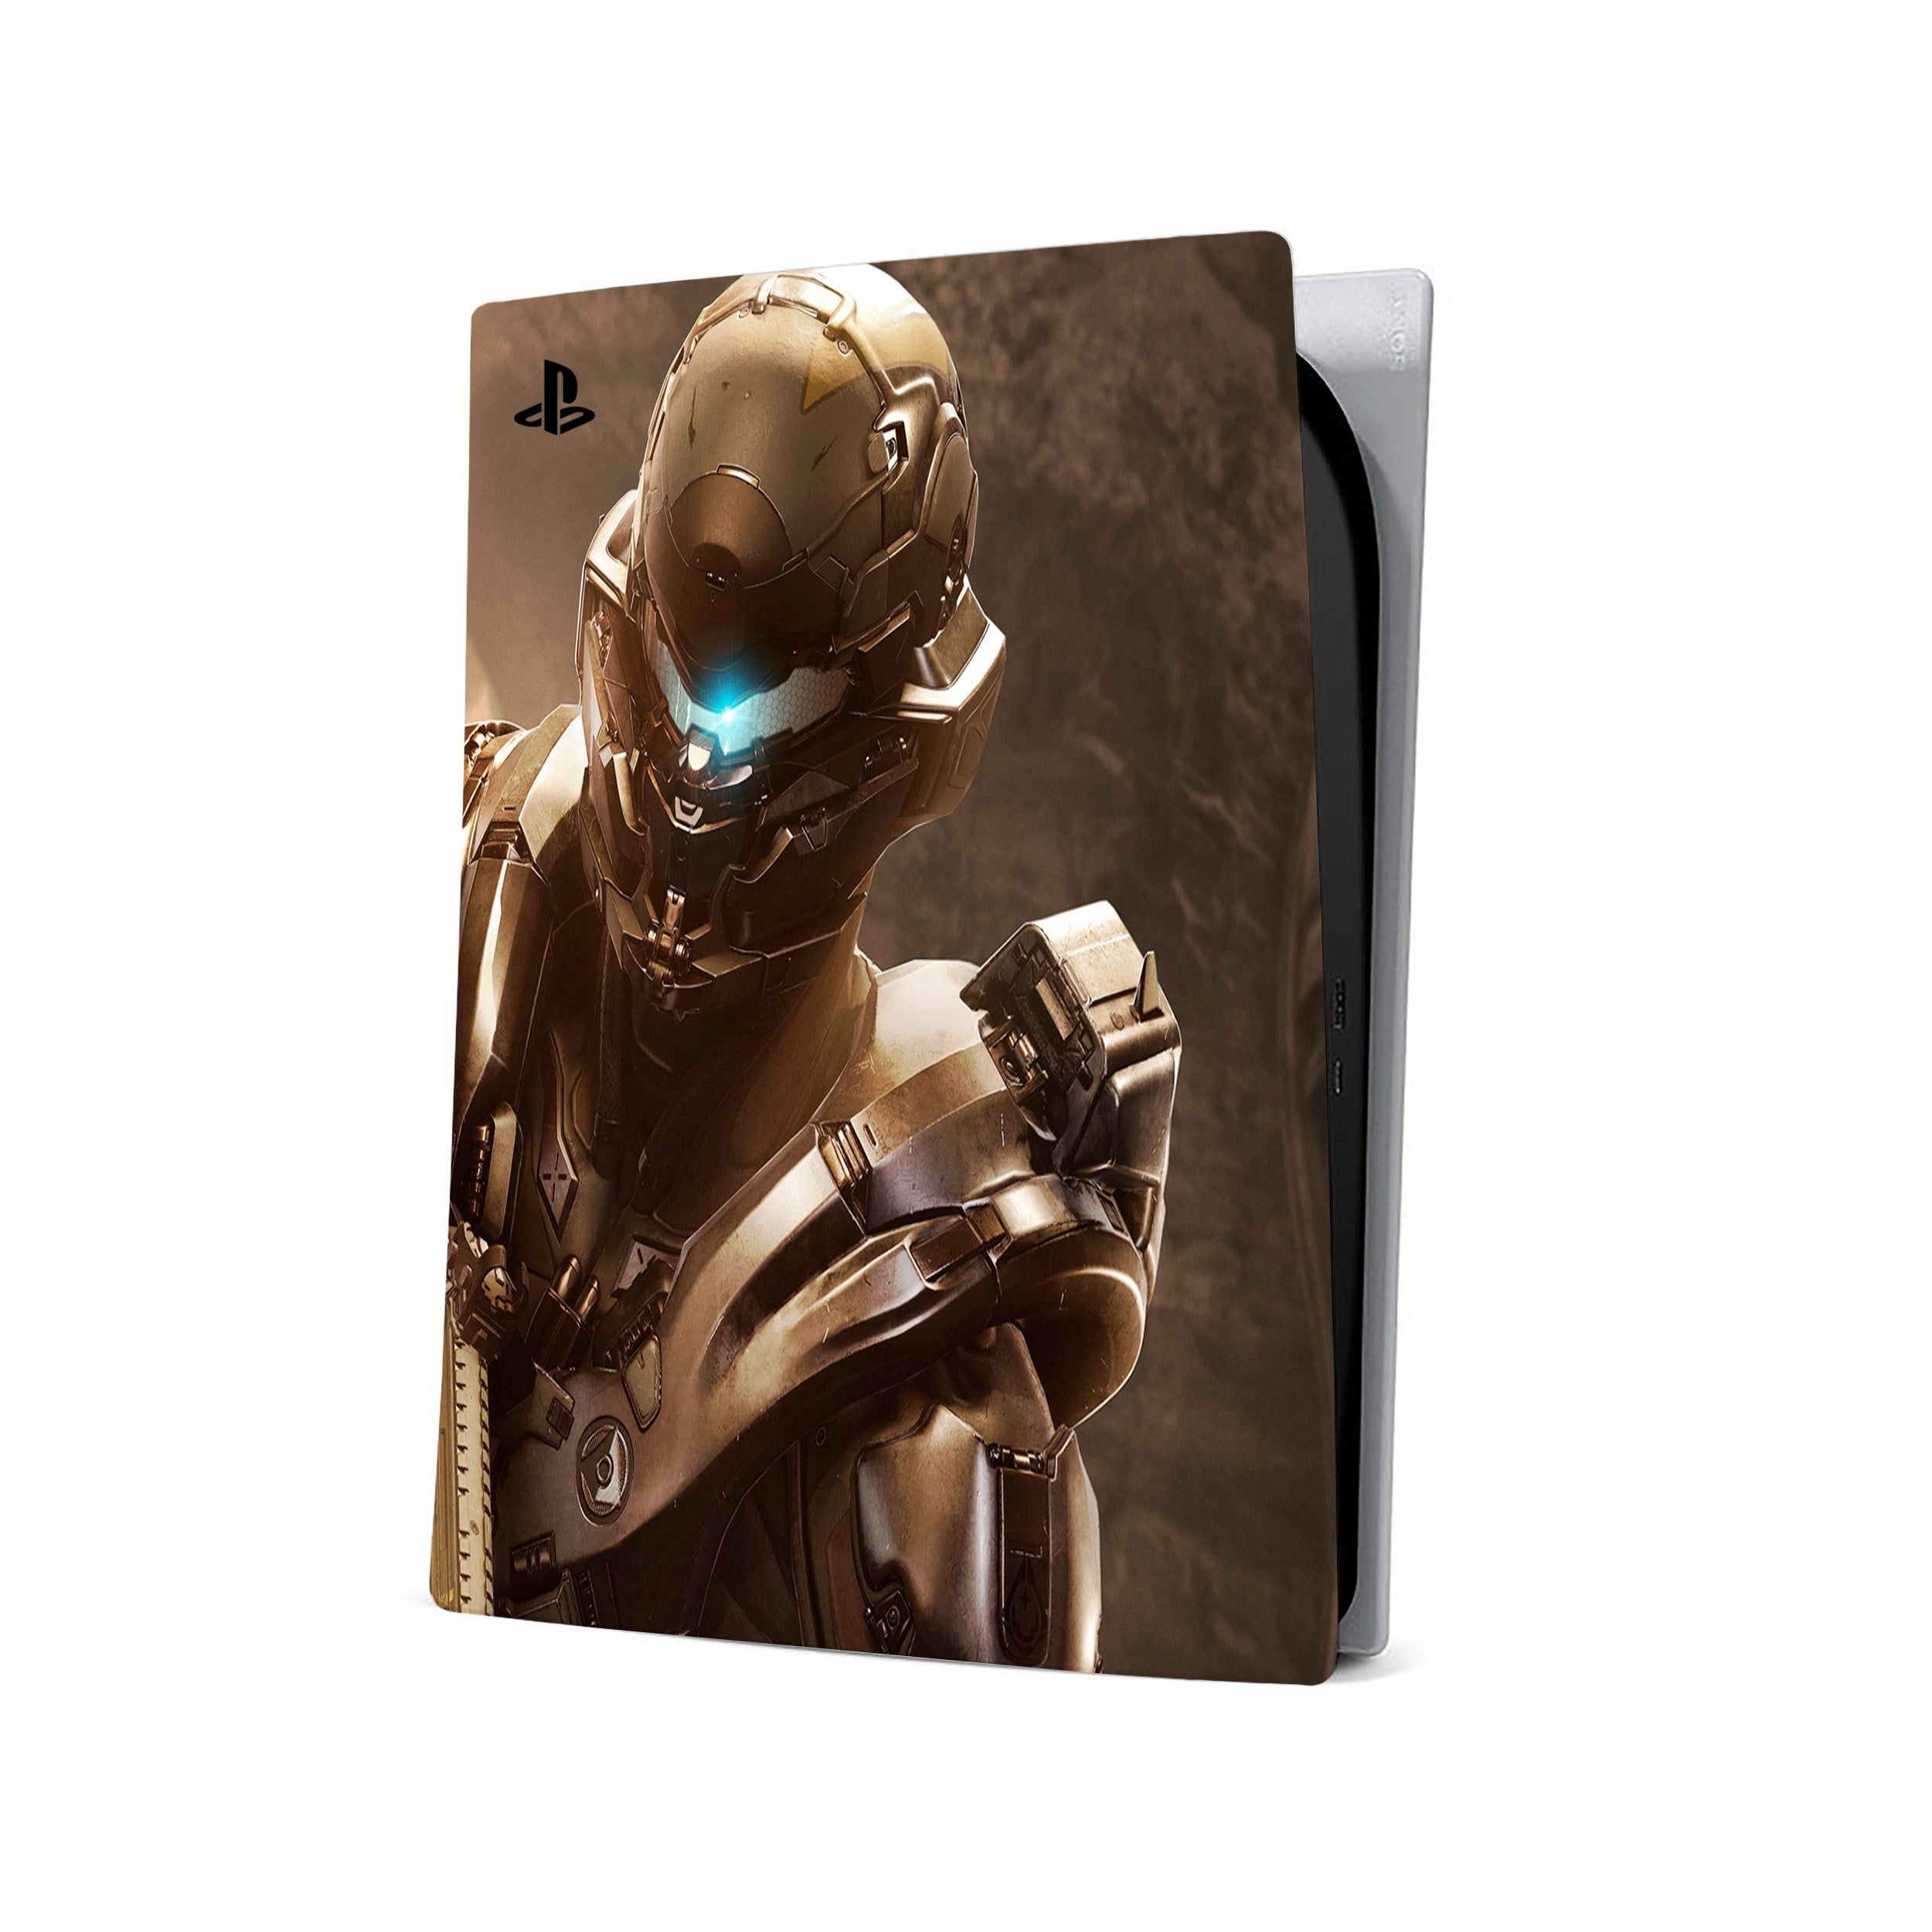 A video game skin featuring a Halo 5 design for the PS5.